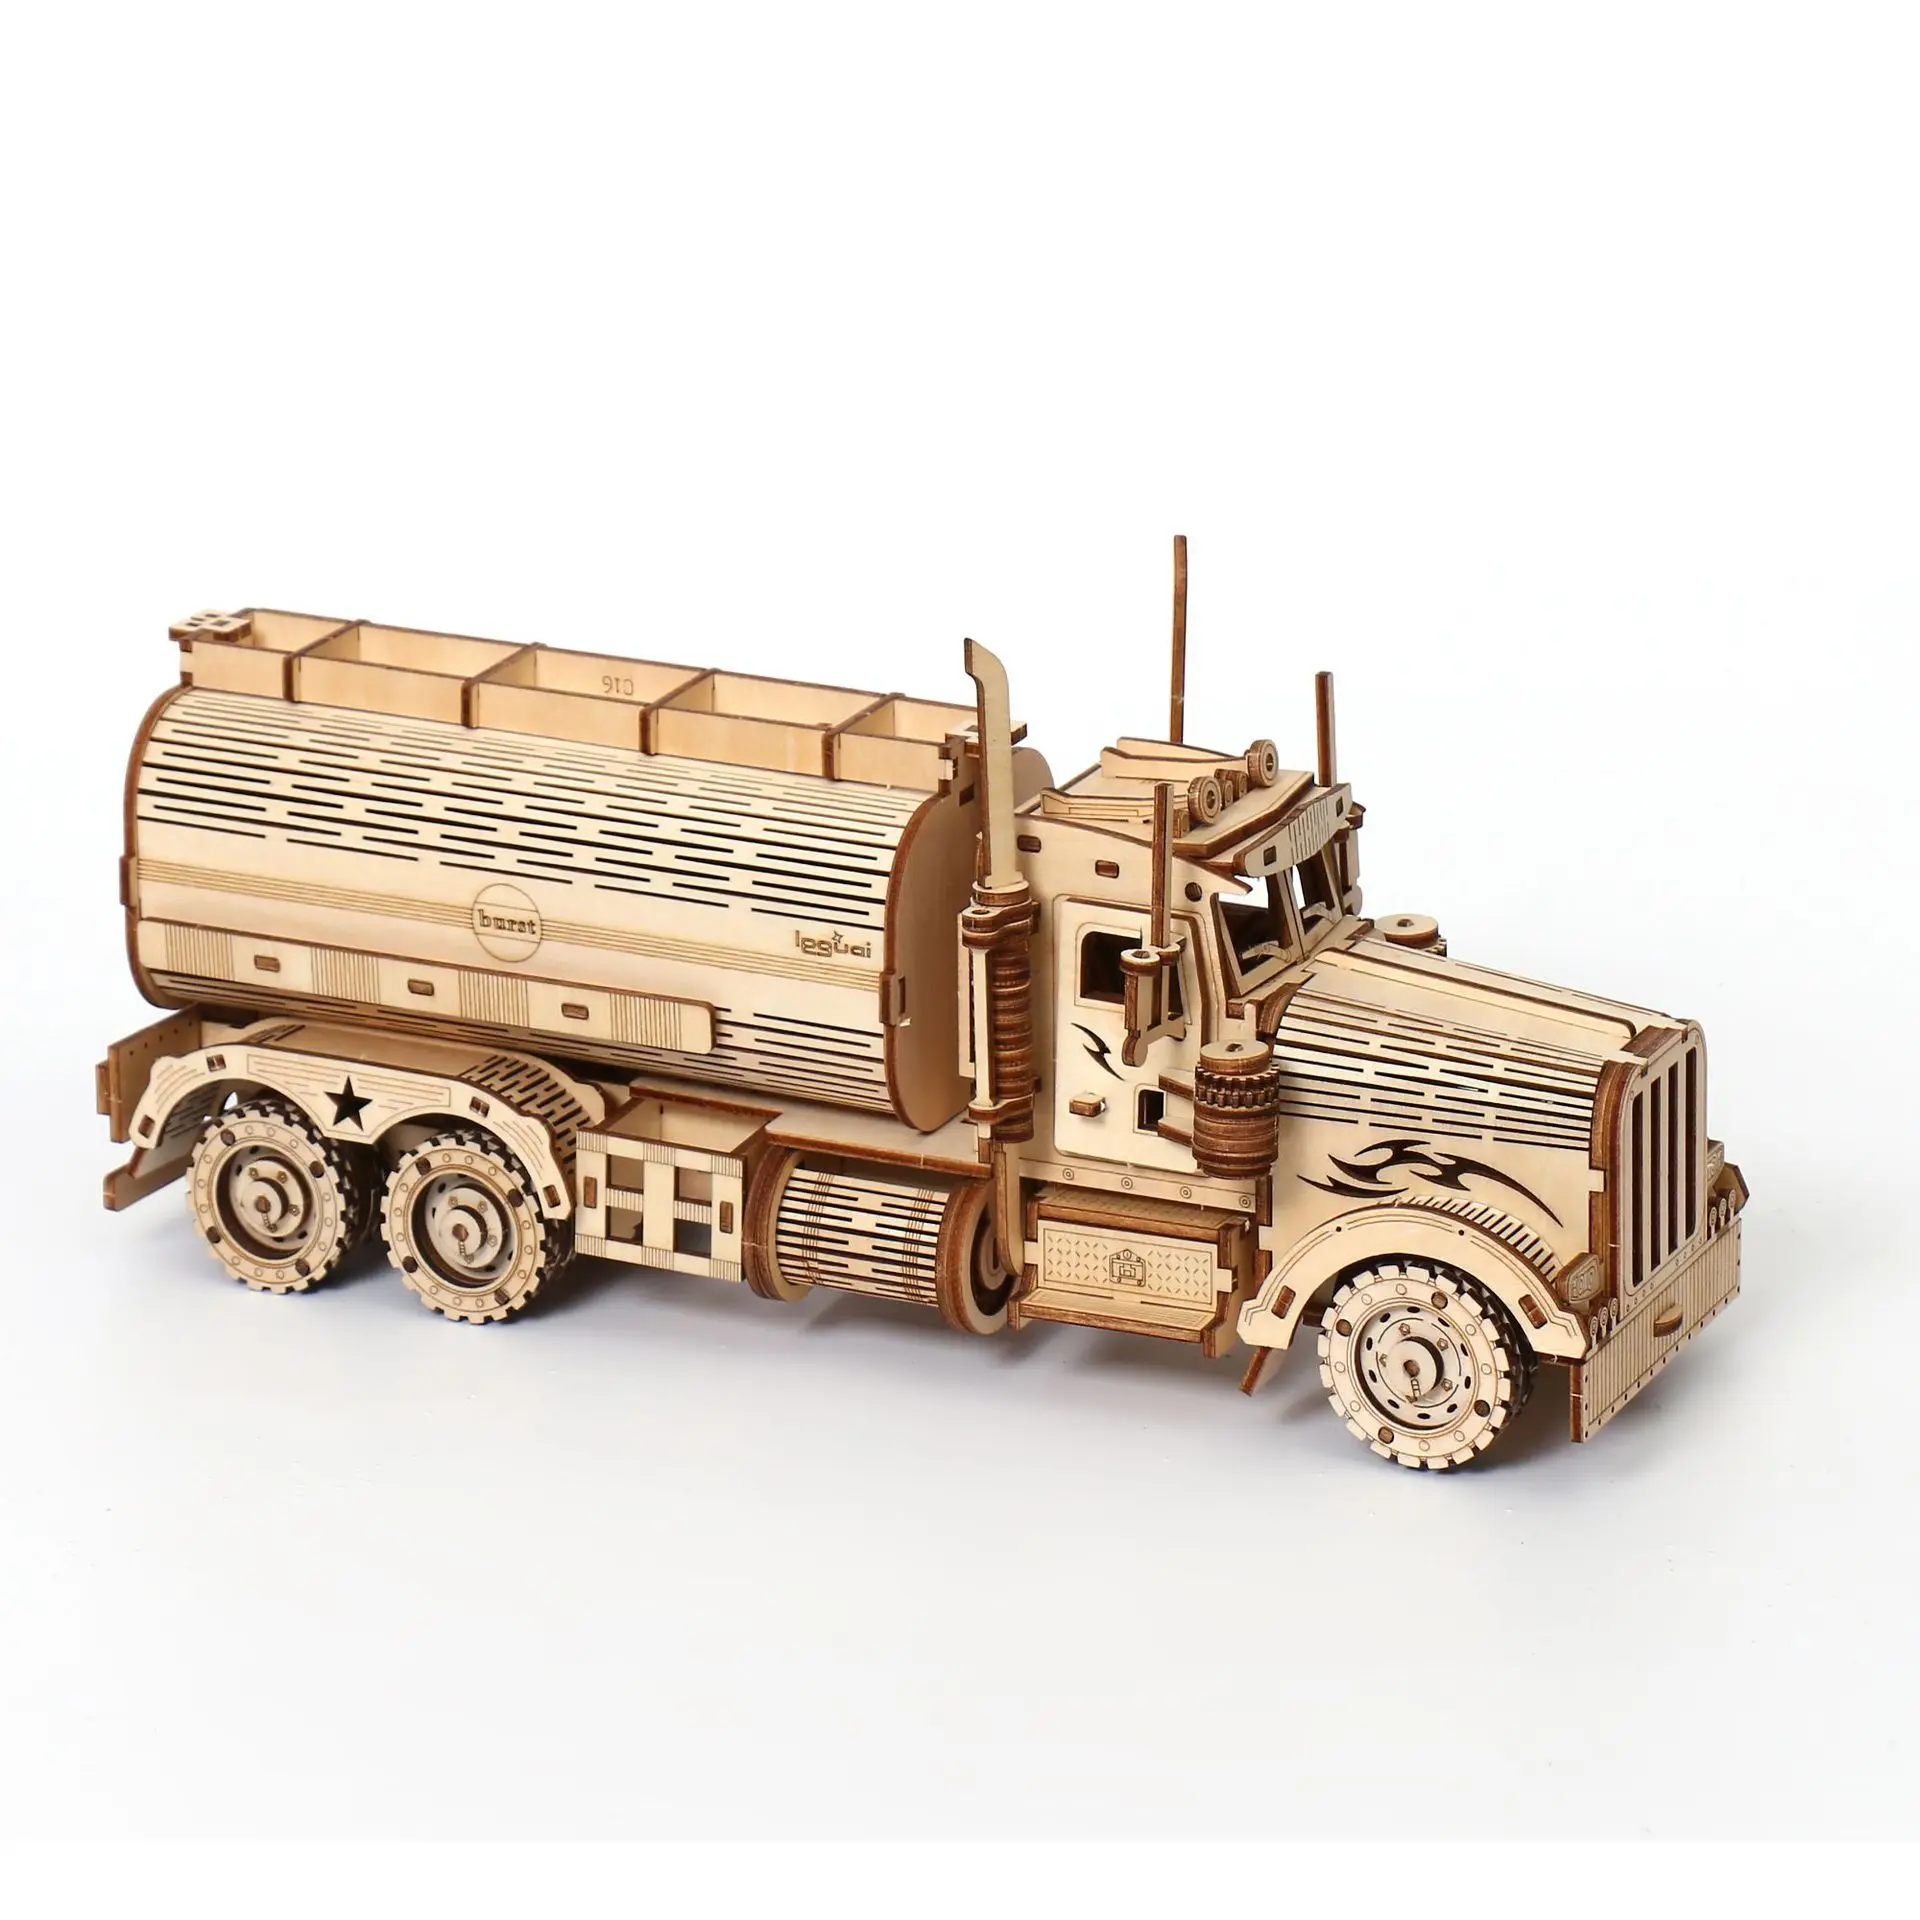  WOODEN.CITY - Wooden Truck Kit Model Cars to Build for